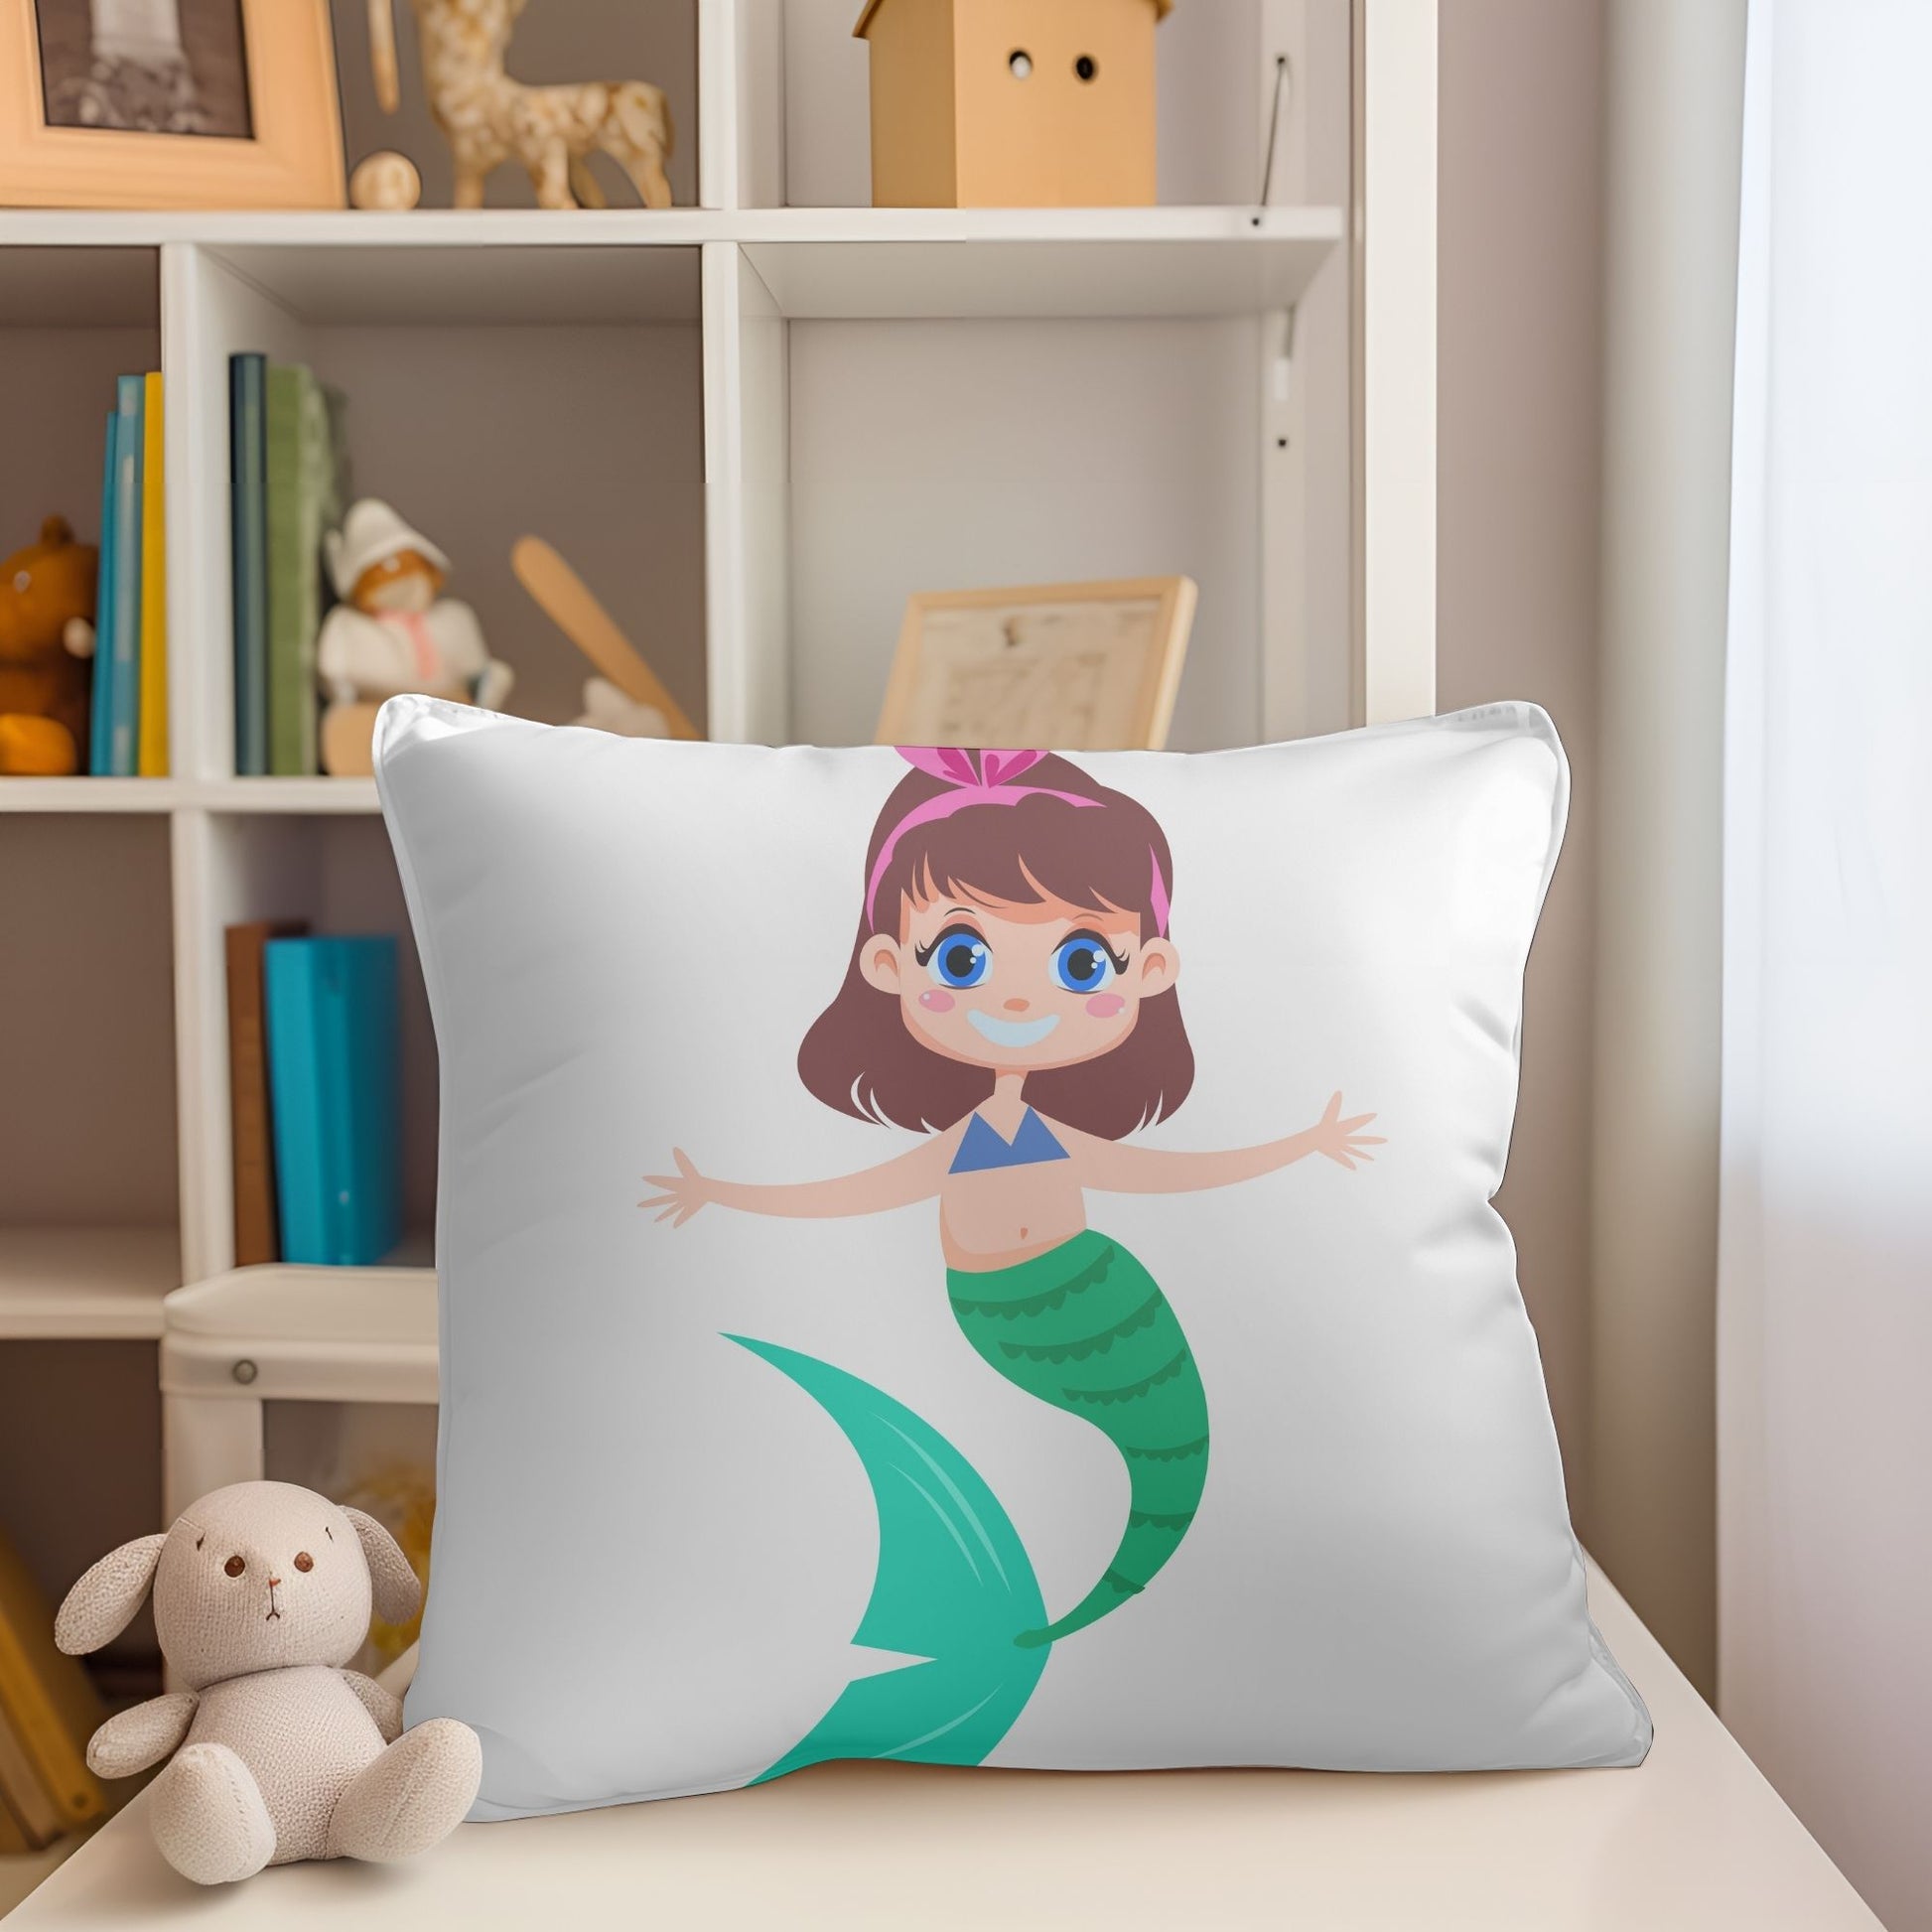 Vibrant pillow featuring a mermaid for a playful atmosphere in kids' rooms.